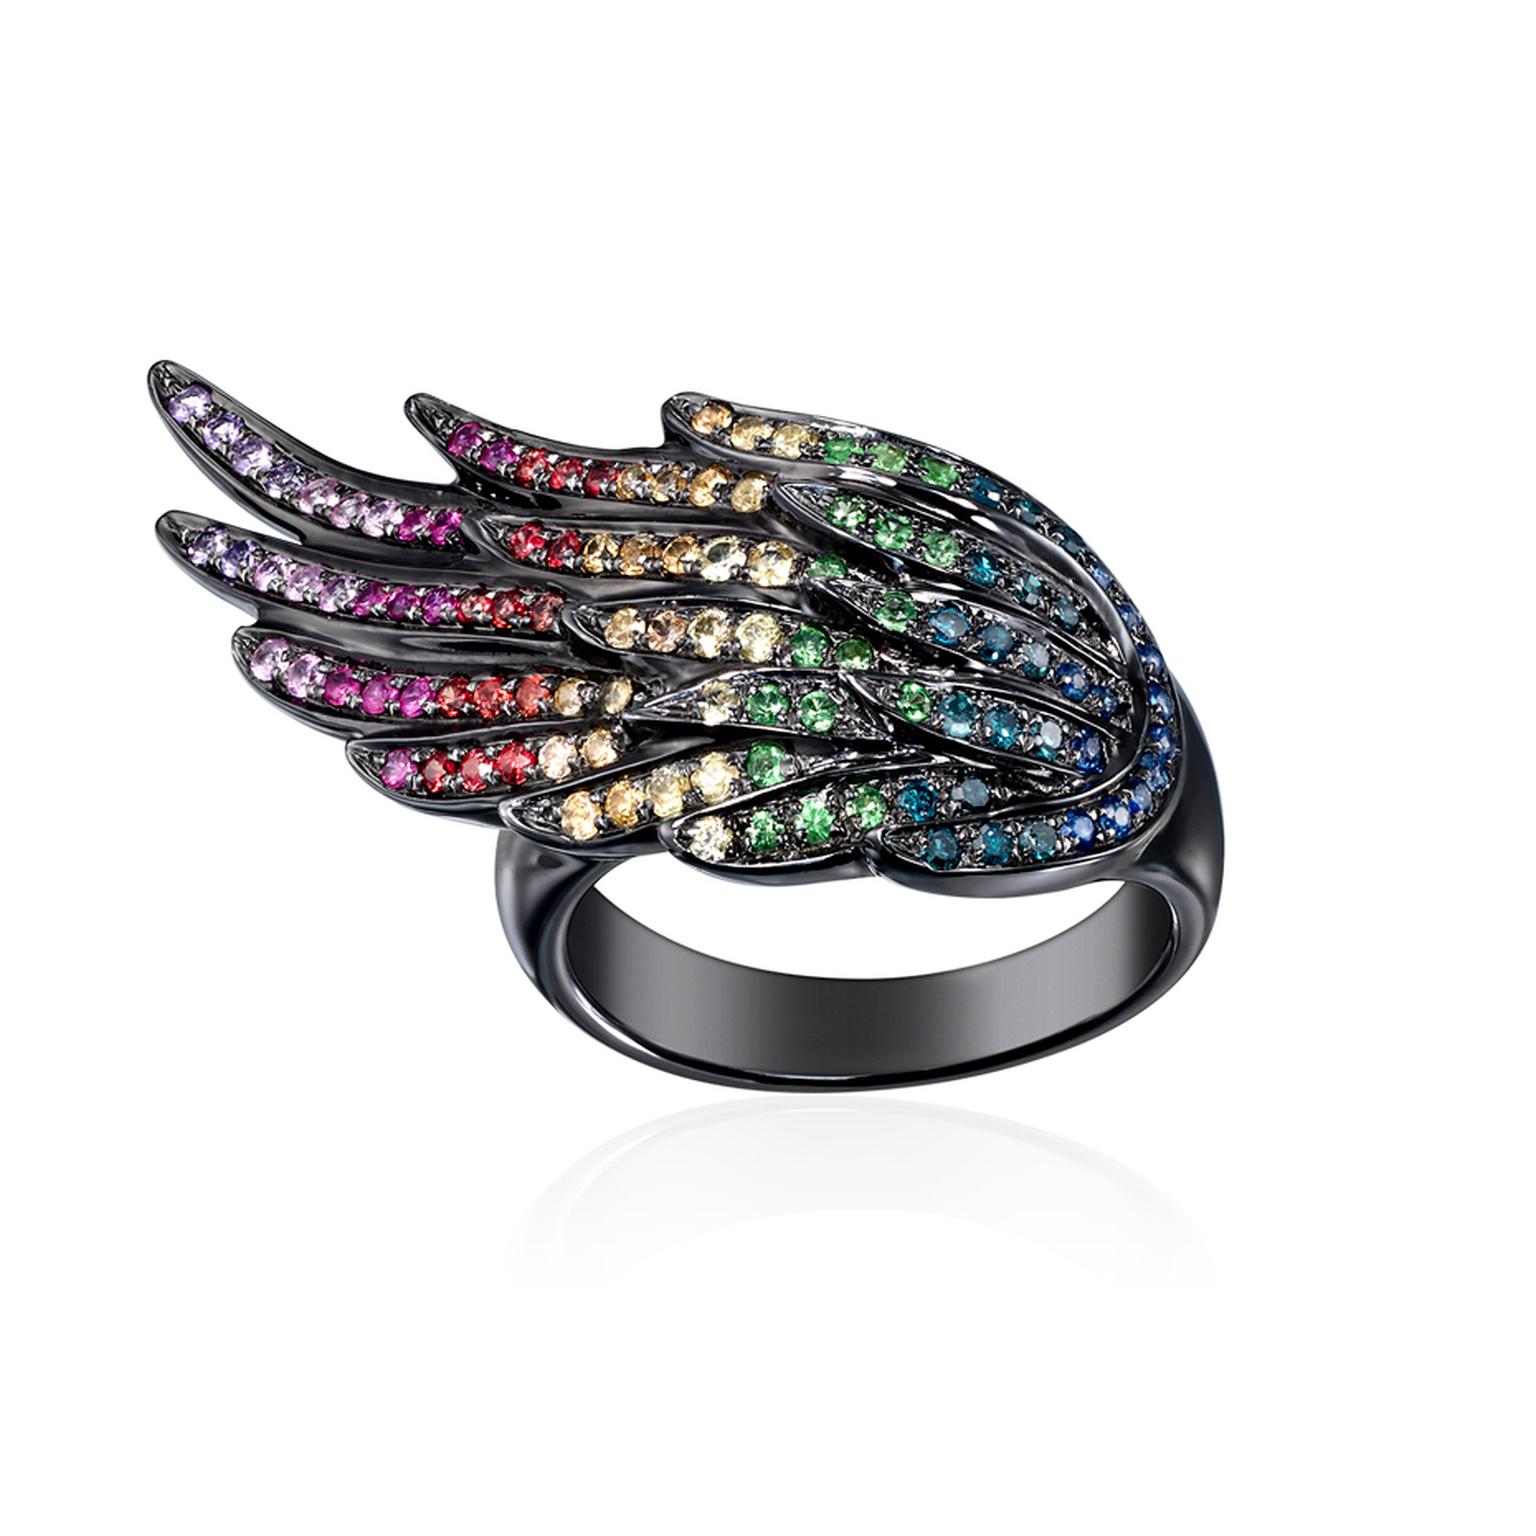 AS29 by Audrey Savransky black rhodium plated pinky Wing ring set with multi-coloured sapphires.